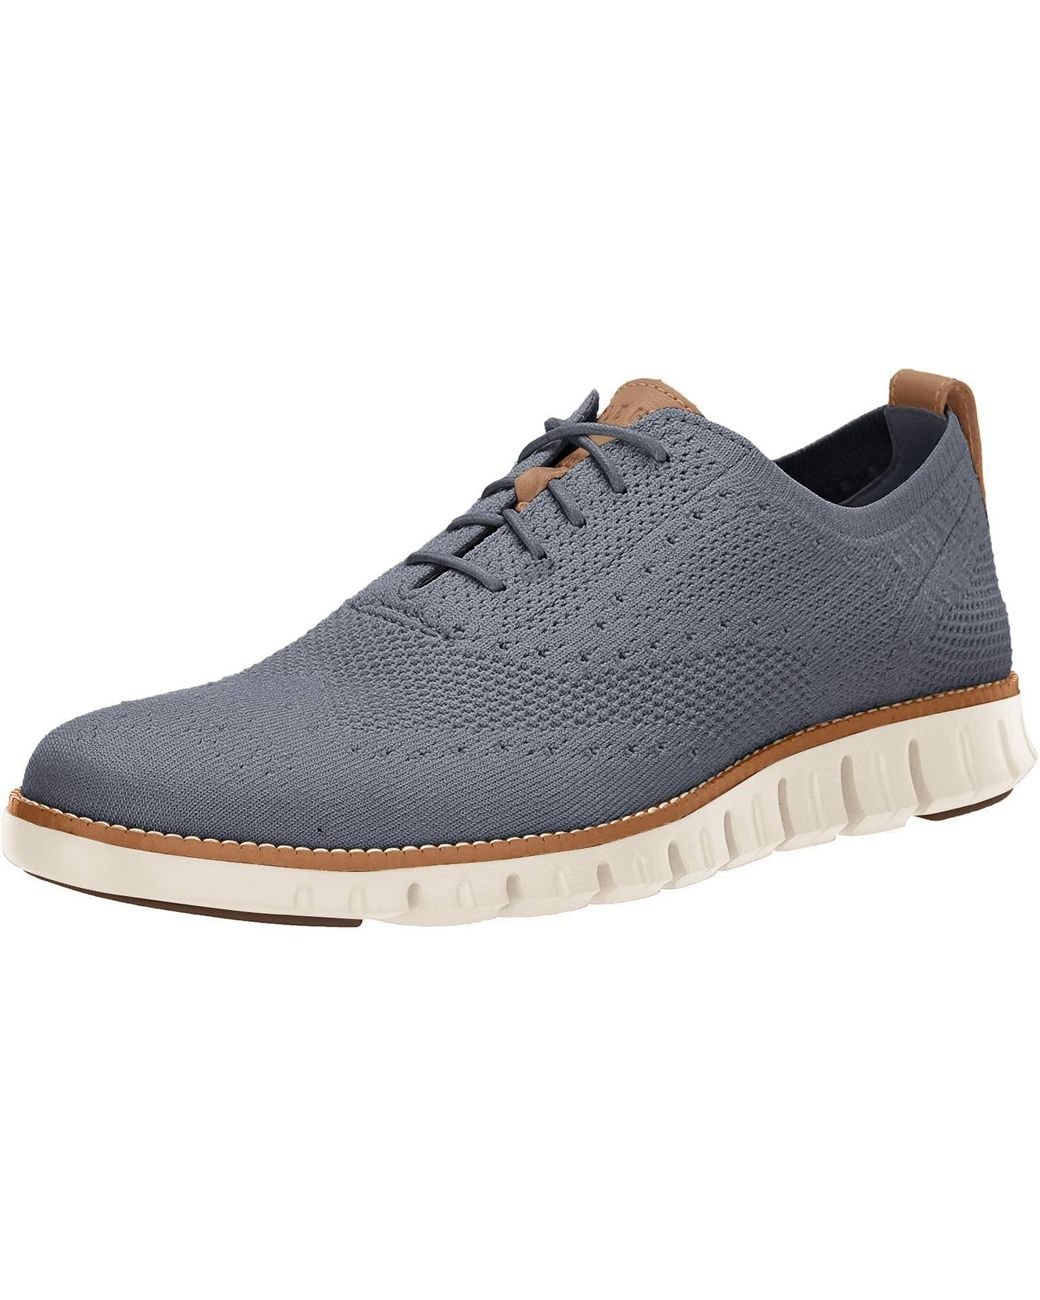 Cole Haan Rubber Zerogrand Stitchlite Oxford in Blue for Men - Lyst